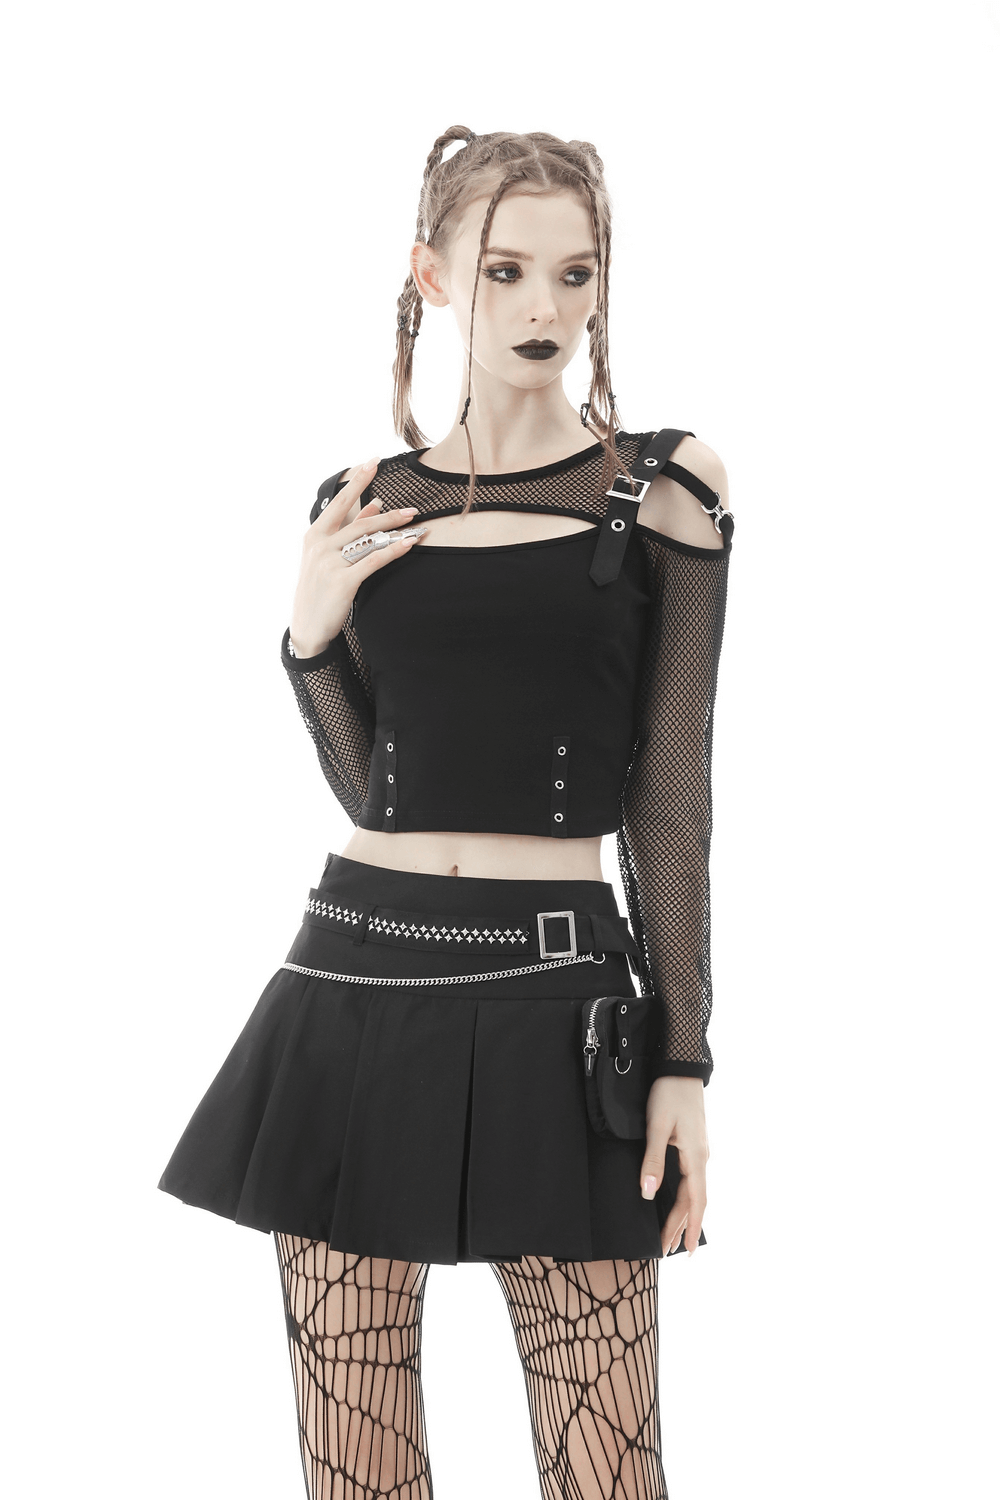 Gothic Female Mini Skirt with Chain Belt and Pocket